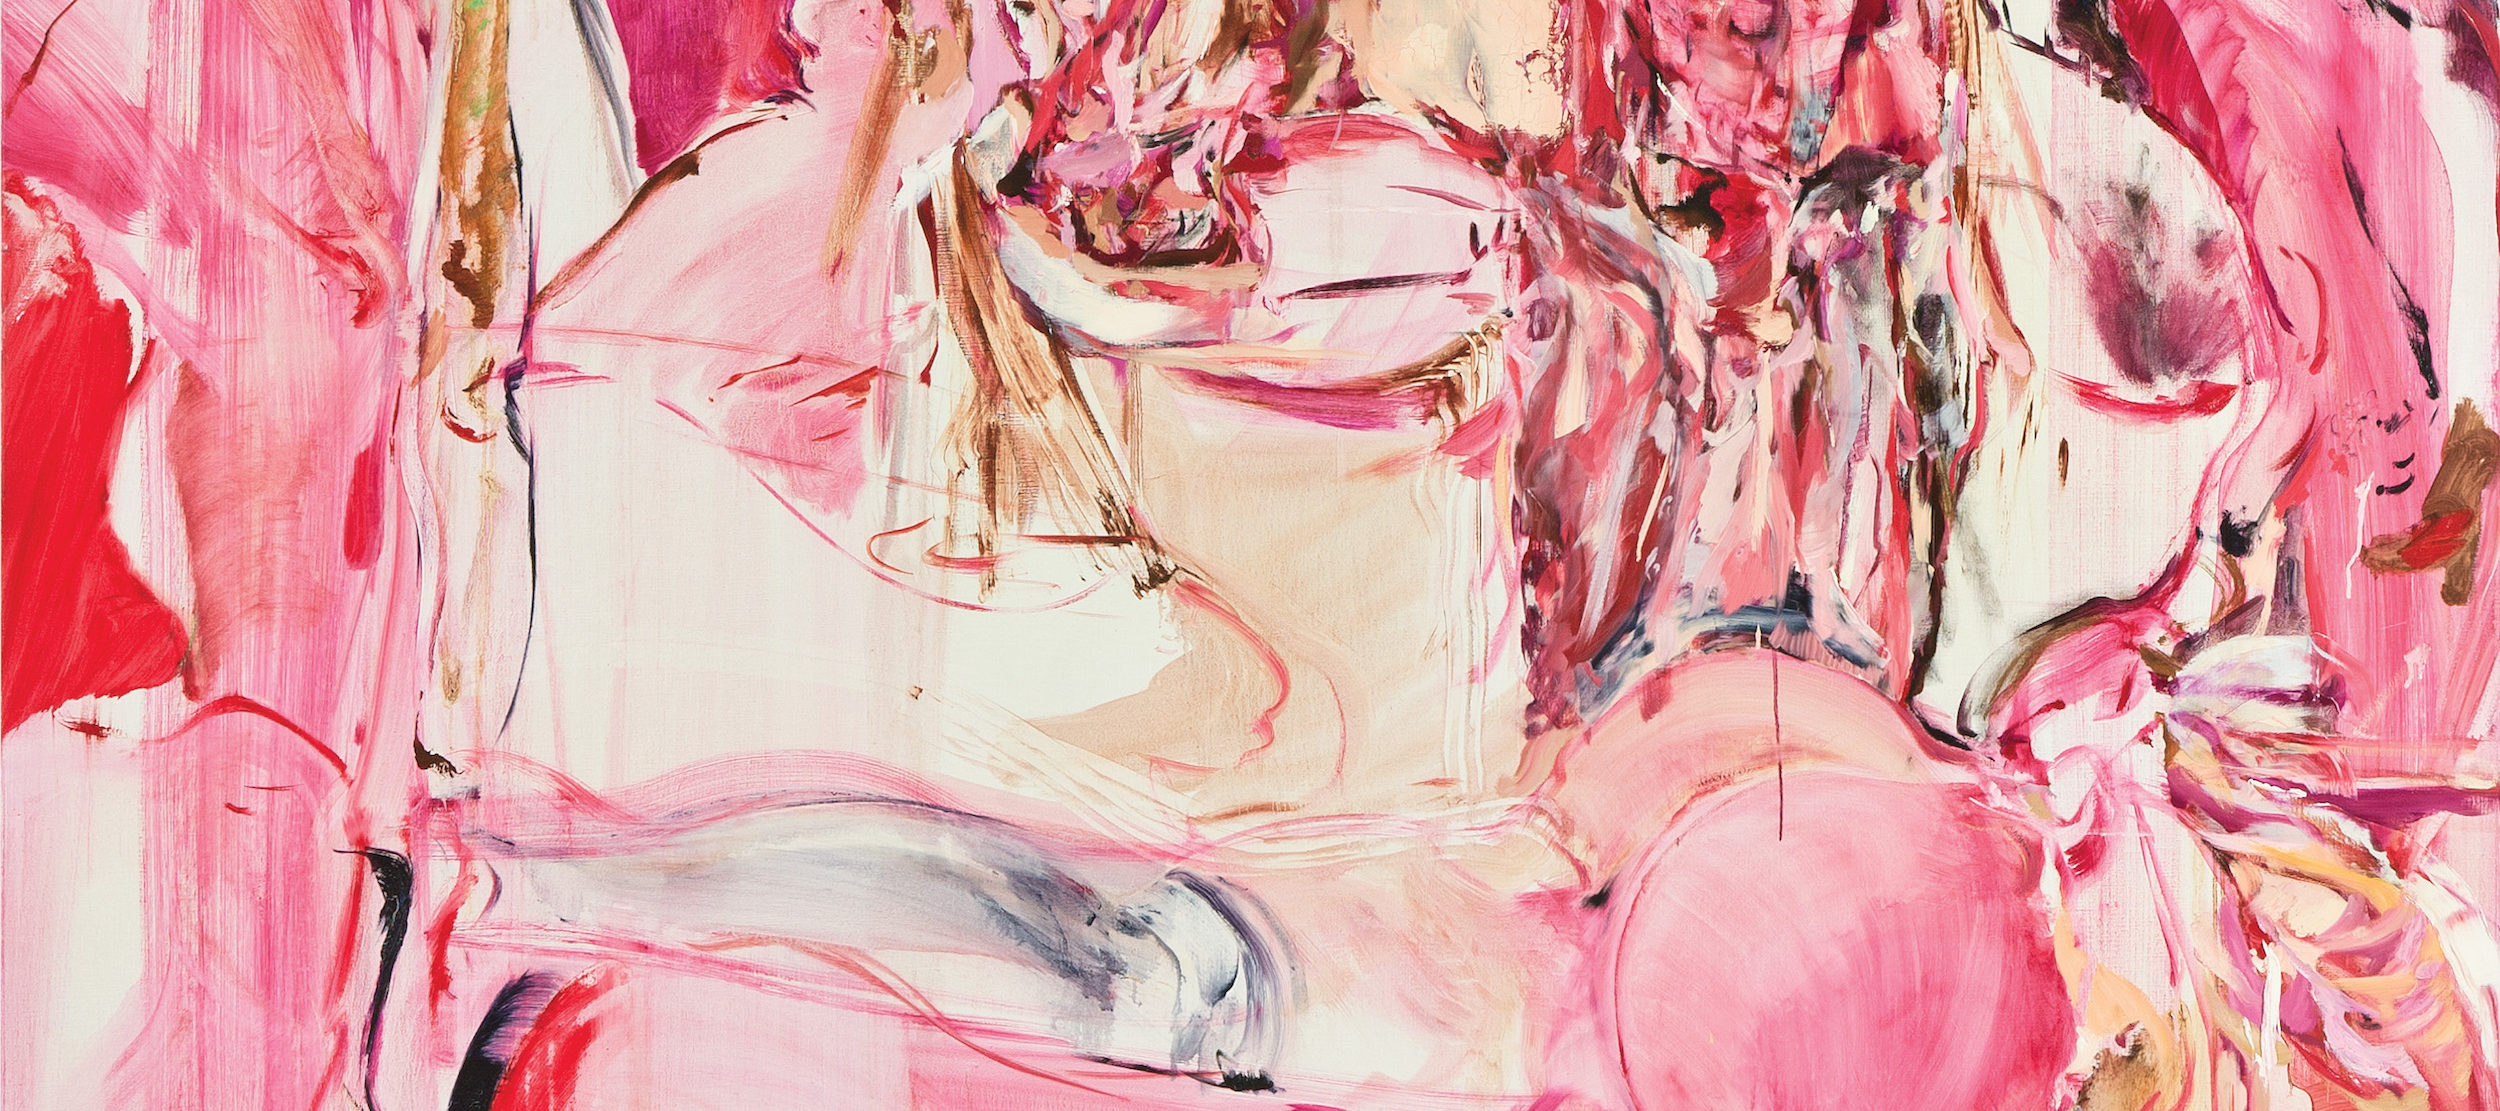 Abstract painting that depicts a reclining female nude using various shades of pink and white.